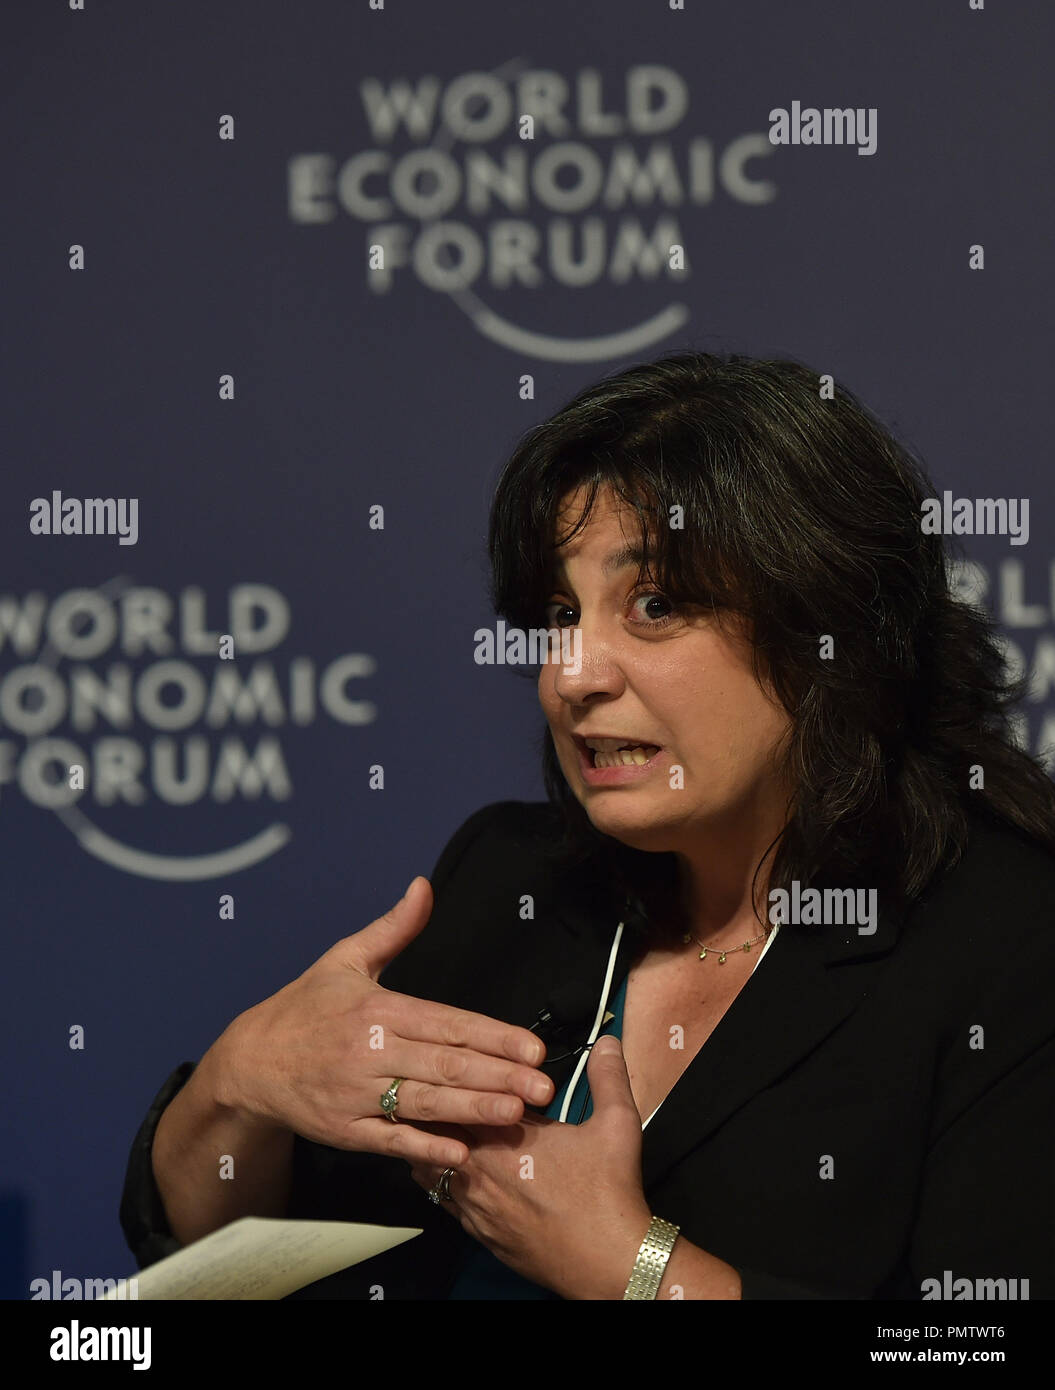 (180919) -- TIANJIN, Sept. 19, 2018 (Xinhua) -- Mariette DiChristina, editor-in-chief of Scientific American of the United States, speaks at a press conference on 'the Top Ten Emerging Technologies' during the Summer Davos Forum held in Tianjin, north China, Sept. 19, 2018. (Xinhua/Yue Yuewei)(ly) Stock Photo